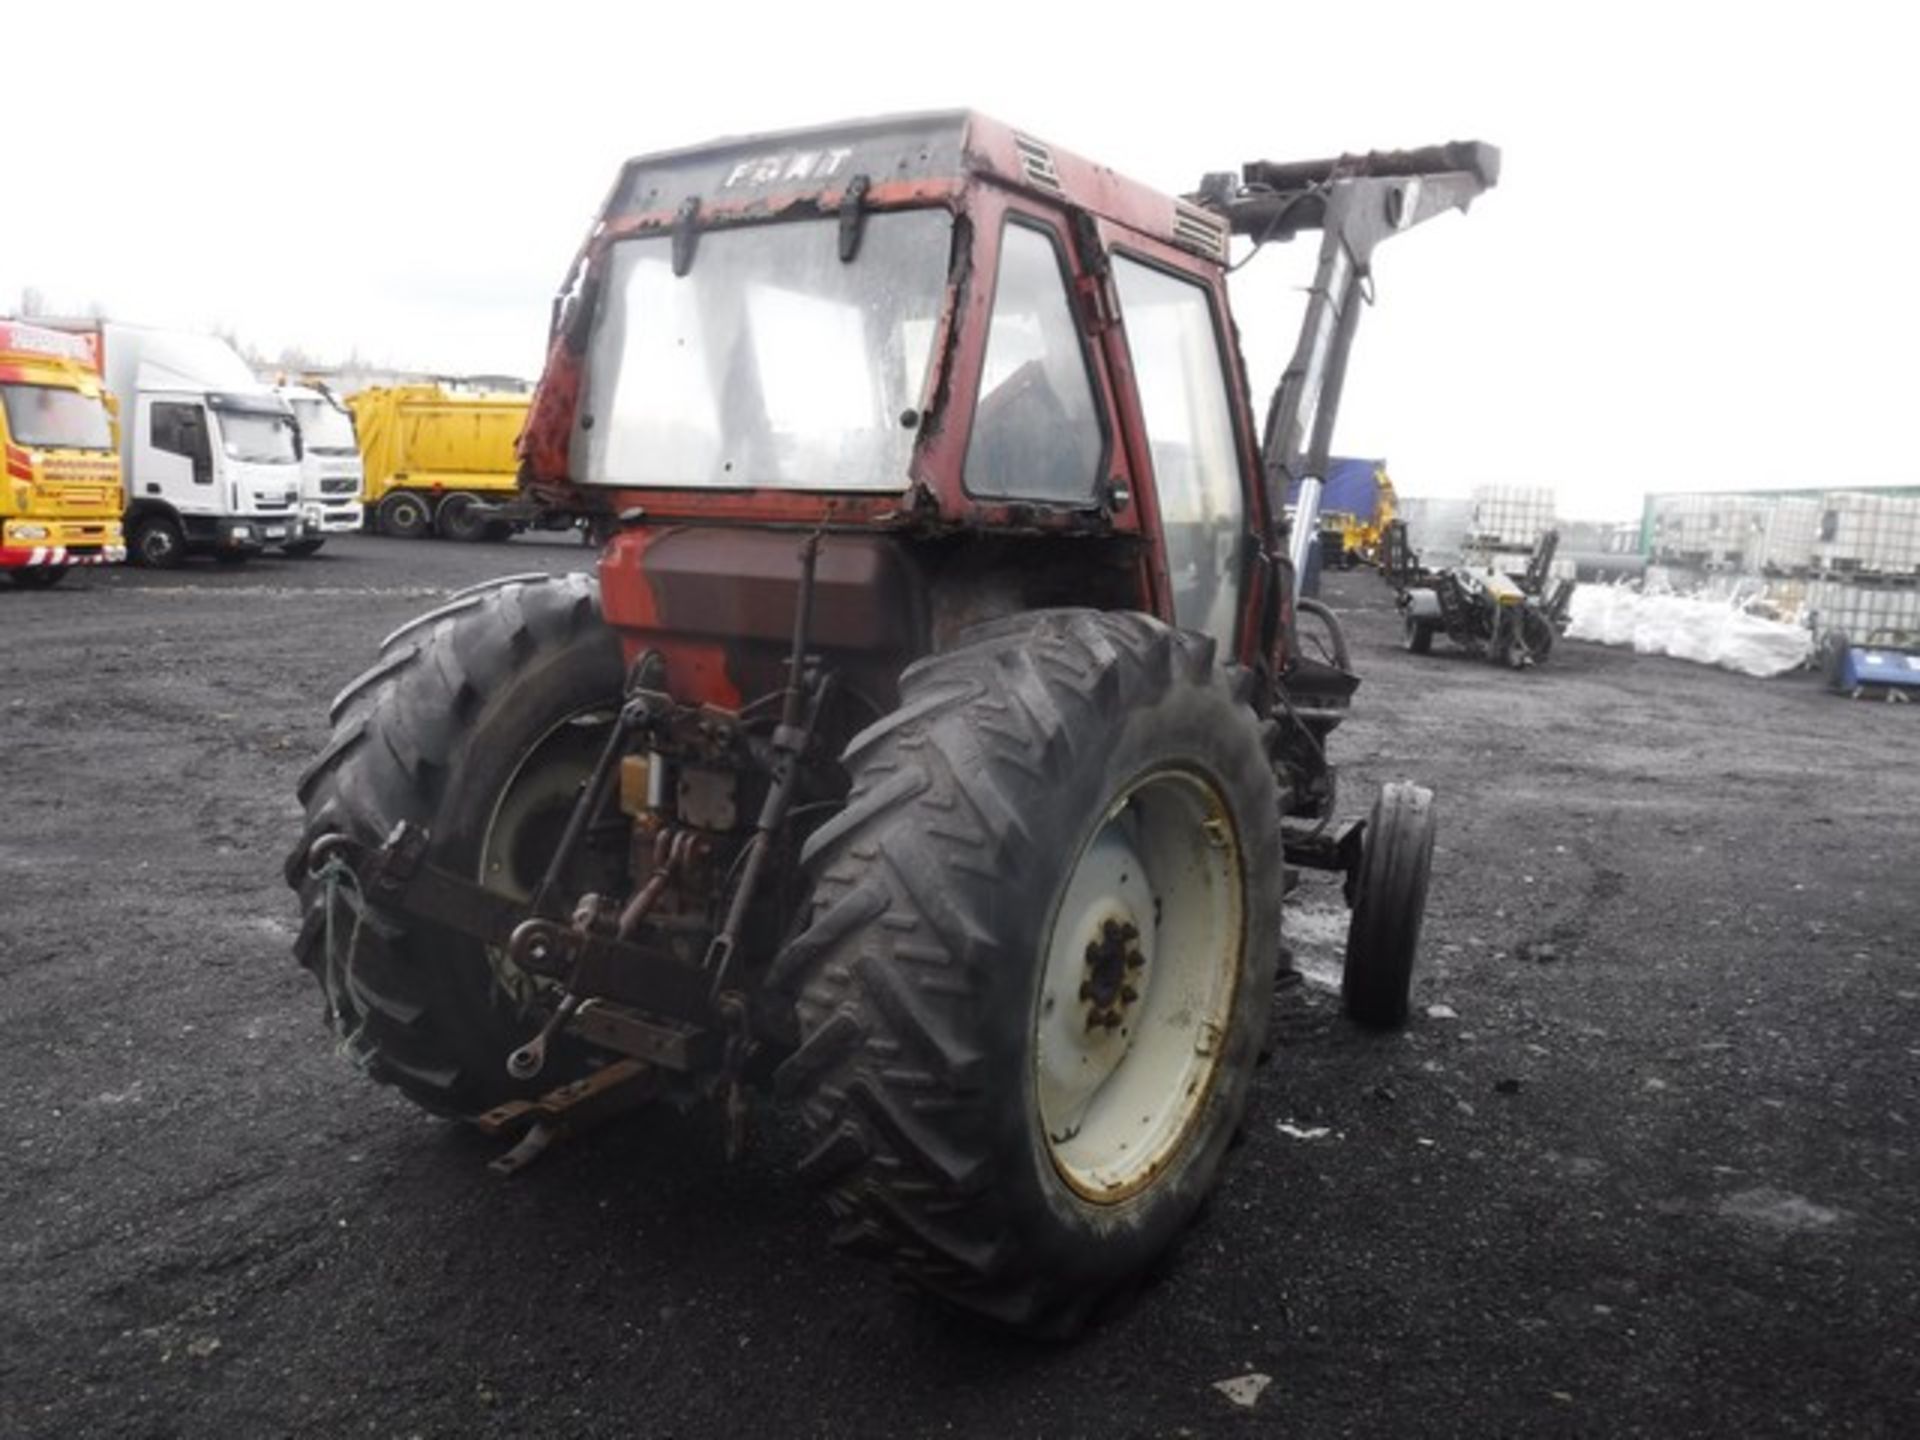 FIAT 780 tractor c/w Quicke 2300 Epower loader 4866hrsS/N 12V852873 - Image 2 of 7